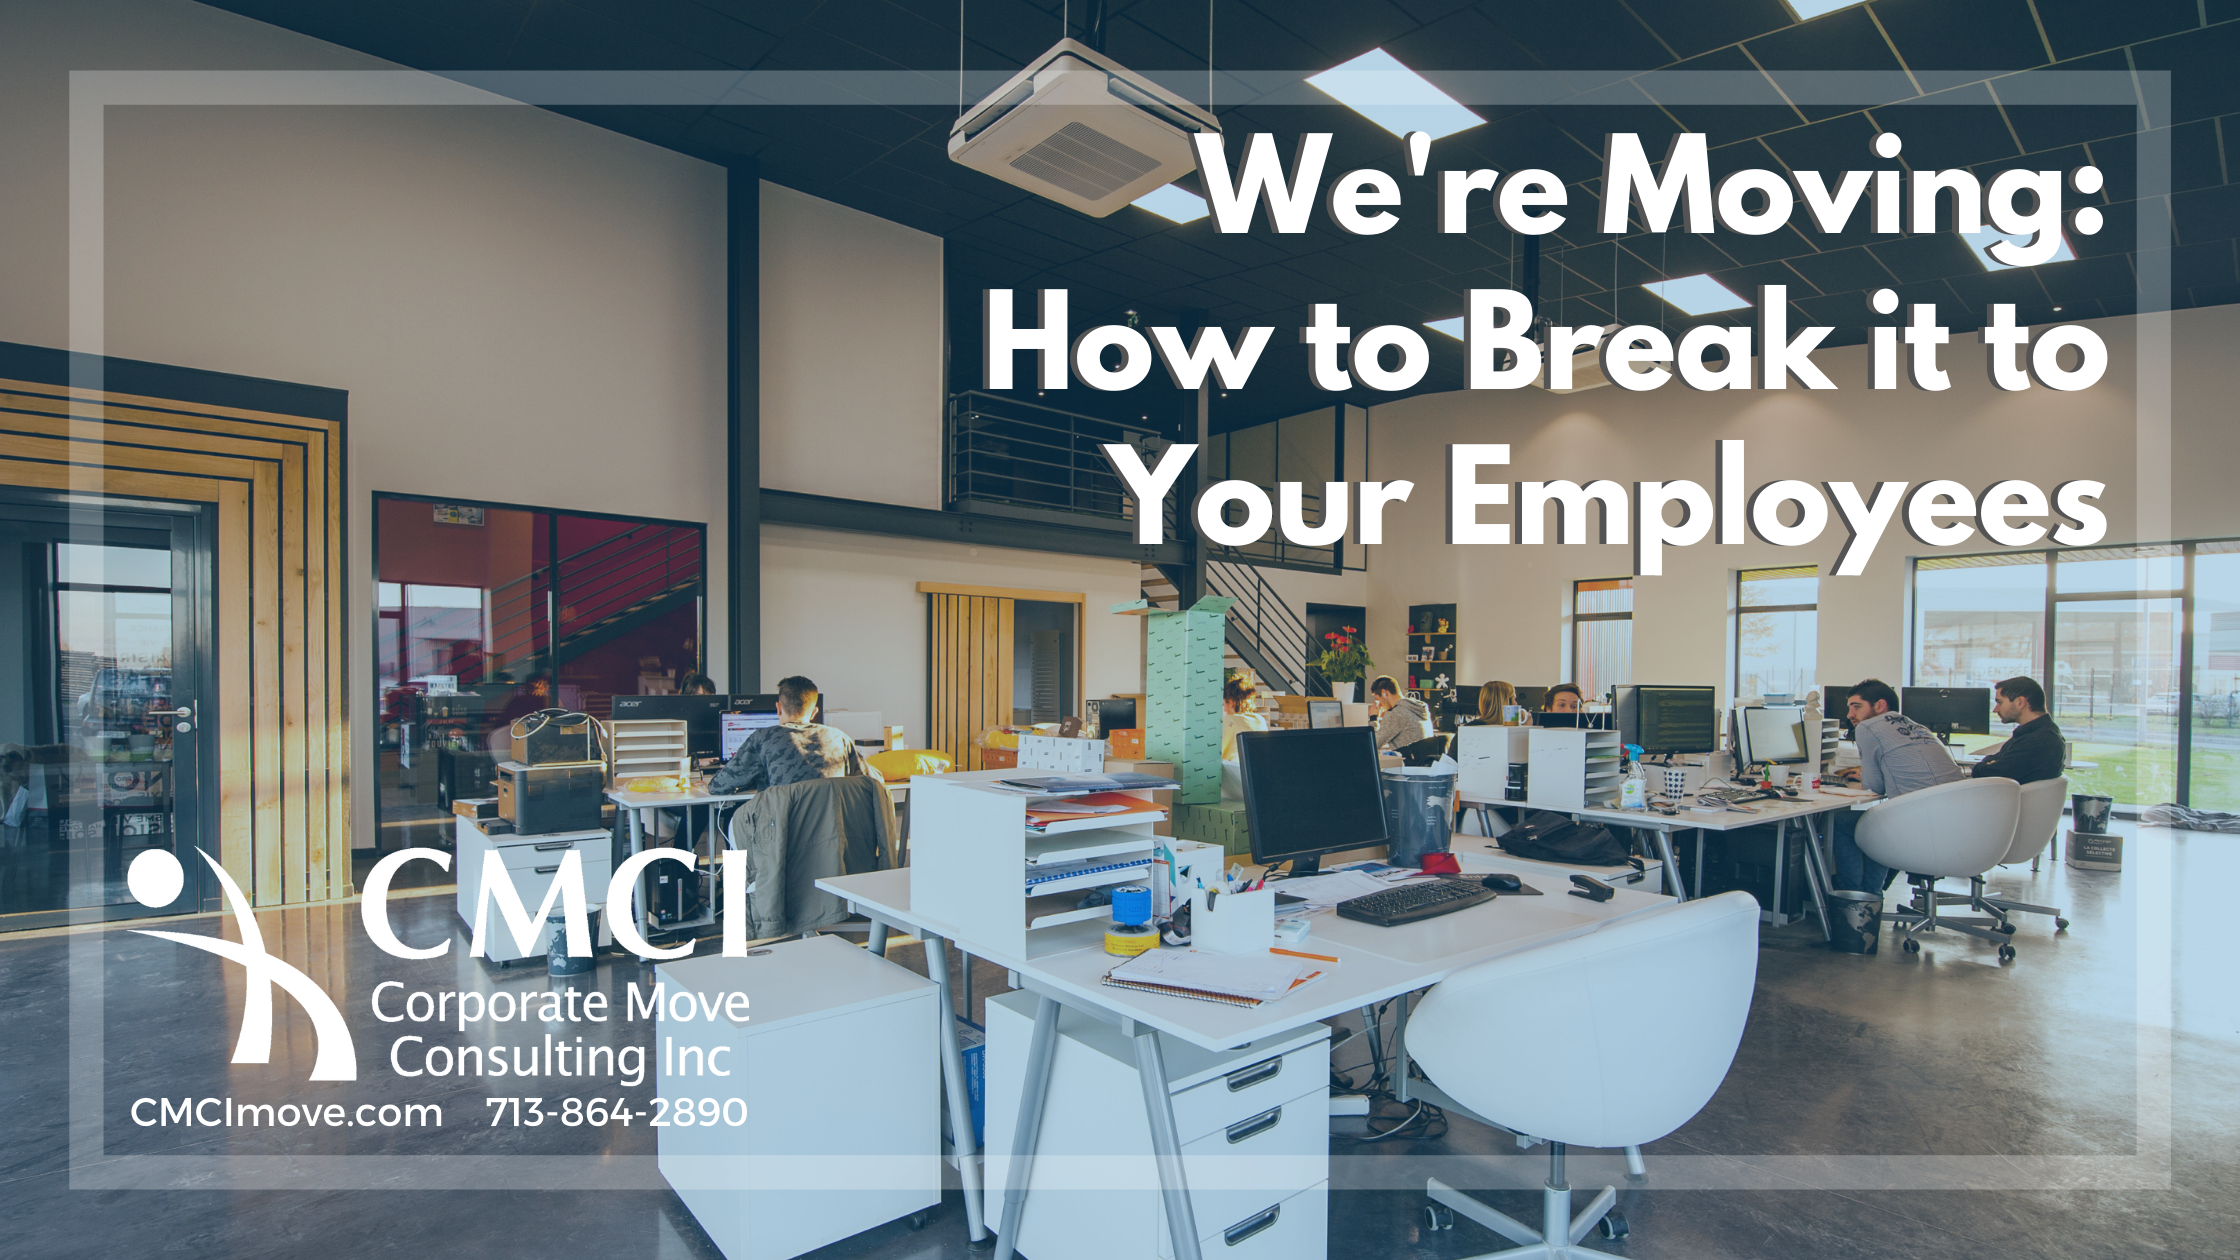 We’re Moving: How to Break it to Your Employees